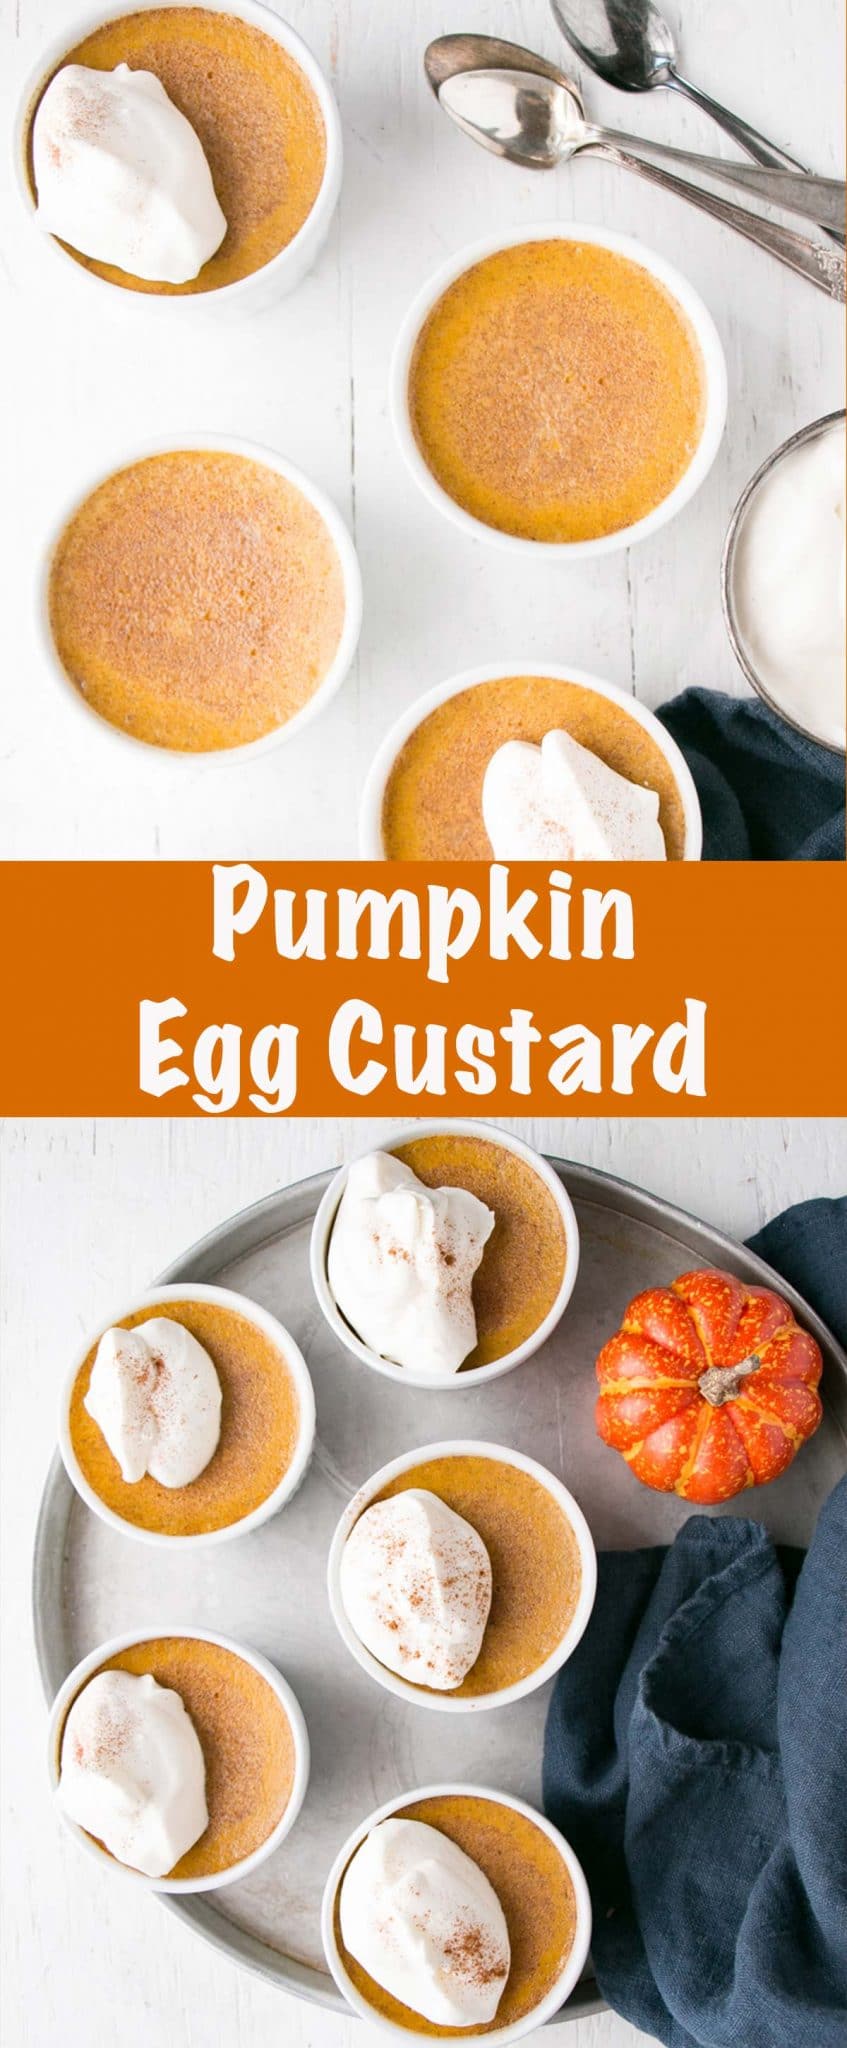 This cozy Pumpkin Egg Custard recipe is a dreamy Fall dessert made from convenient ingredients and is almost effortless to whip up. These Egg Custards are creamy, luscious, and have just the right amount of pumpkin and spice.  via @mykitchenlove